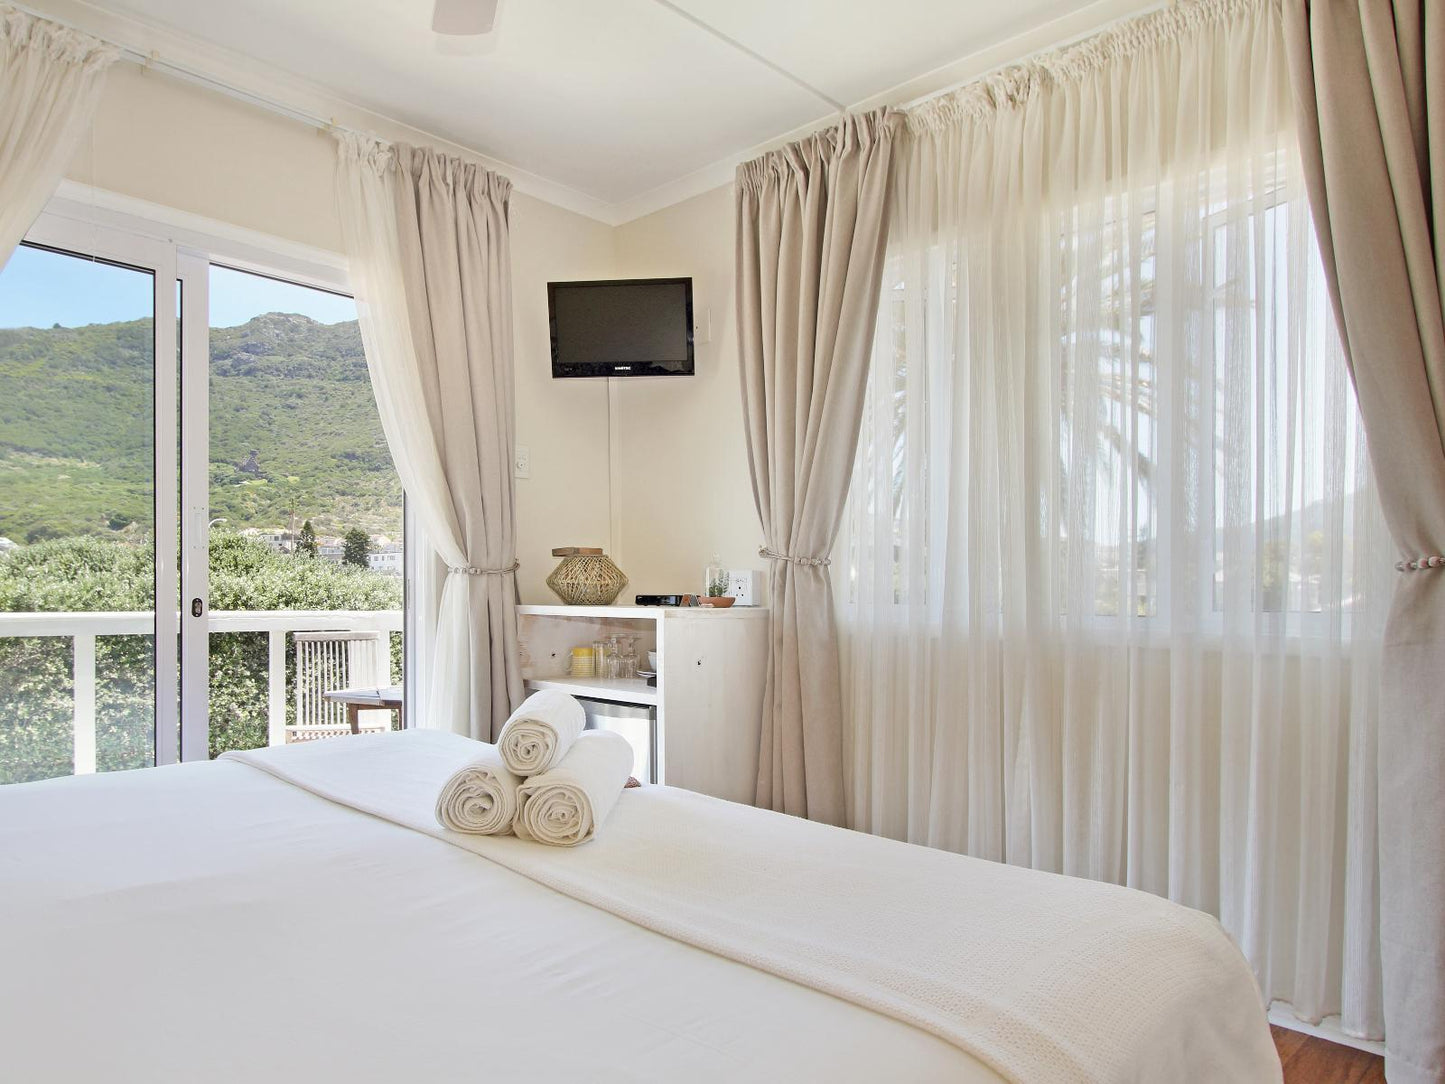 Deluxe Room 4 SuperKing Size Bed @ Beach House Guest House - Hout Bay